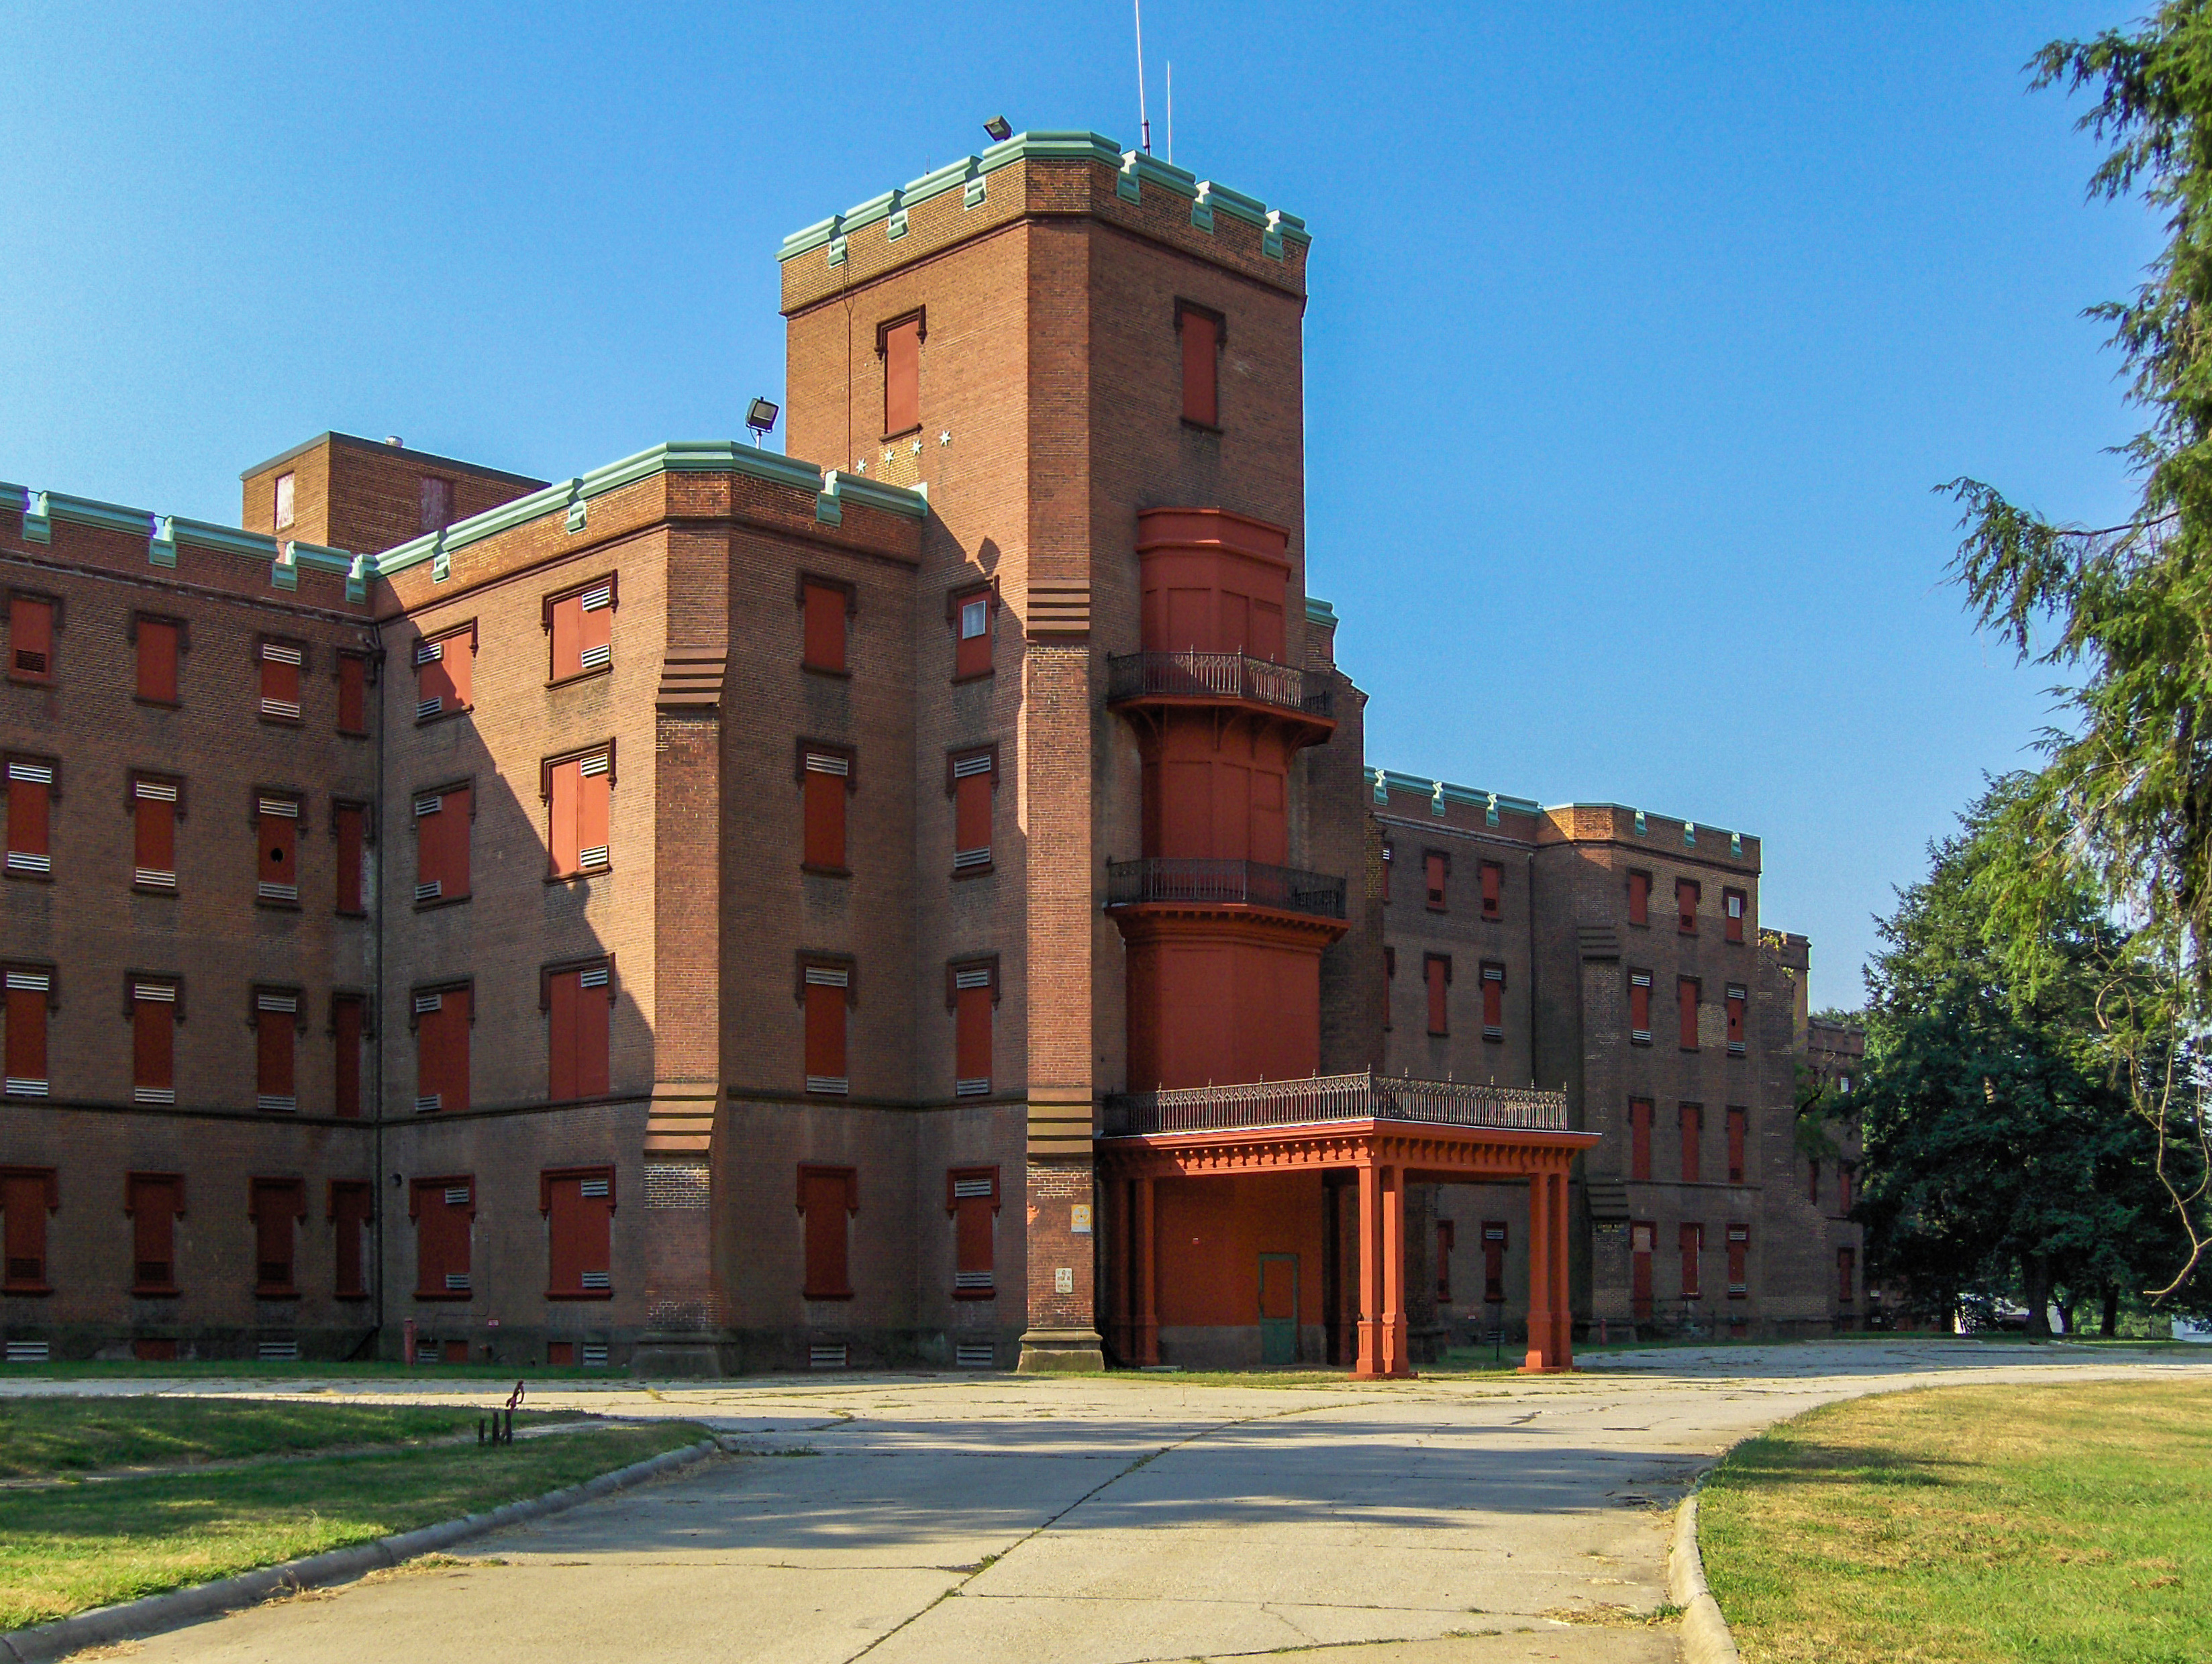 St. Elizabeths Hospital, where Askins was a patient between 1939 and 1951